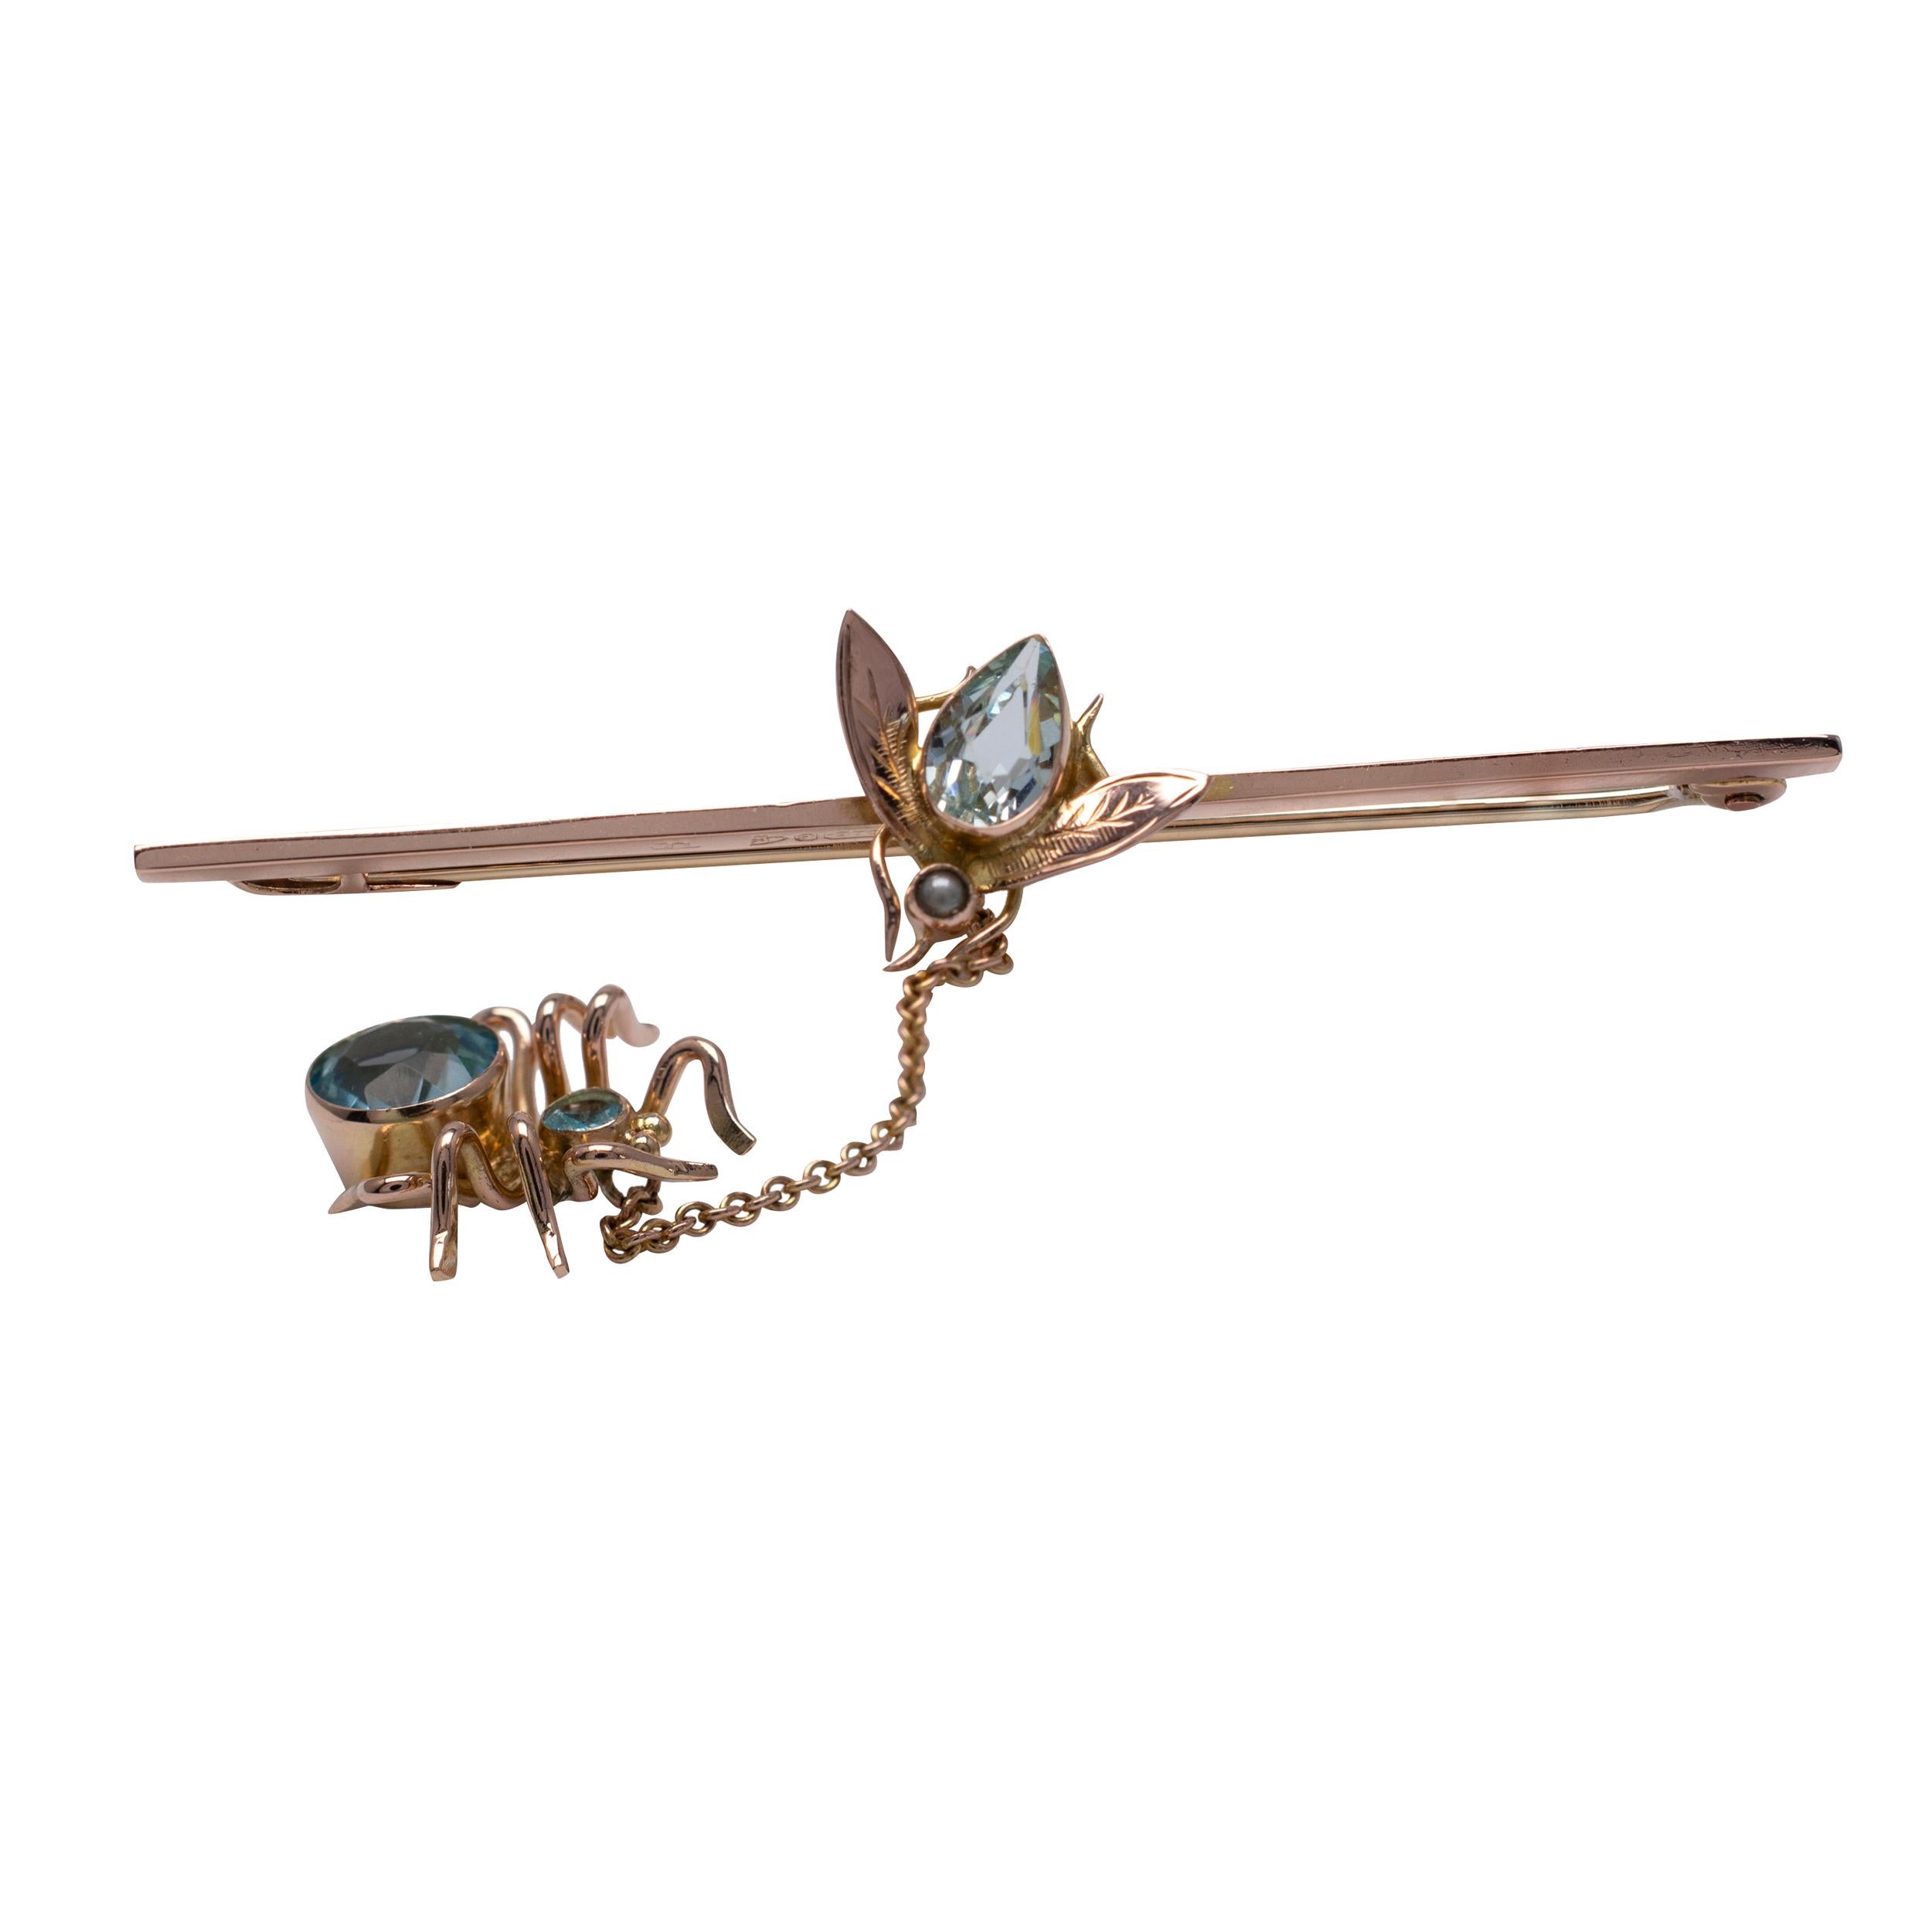 This fabulous antique Art Deco fly and spider brooch is crafted in 9 karat rose gold and features aquamarine, topaz and pearl gemstones. Clearly hallmarked for Chester 1921.

Fly set with a single bezel set 0.65-carat pear cut aquamarine with a